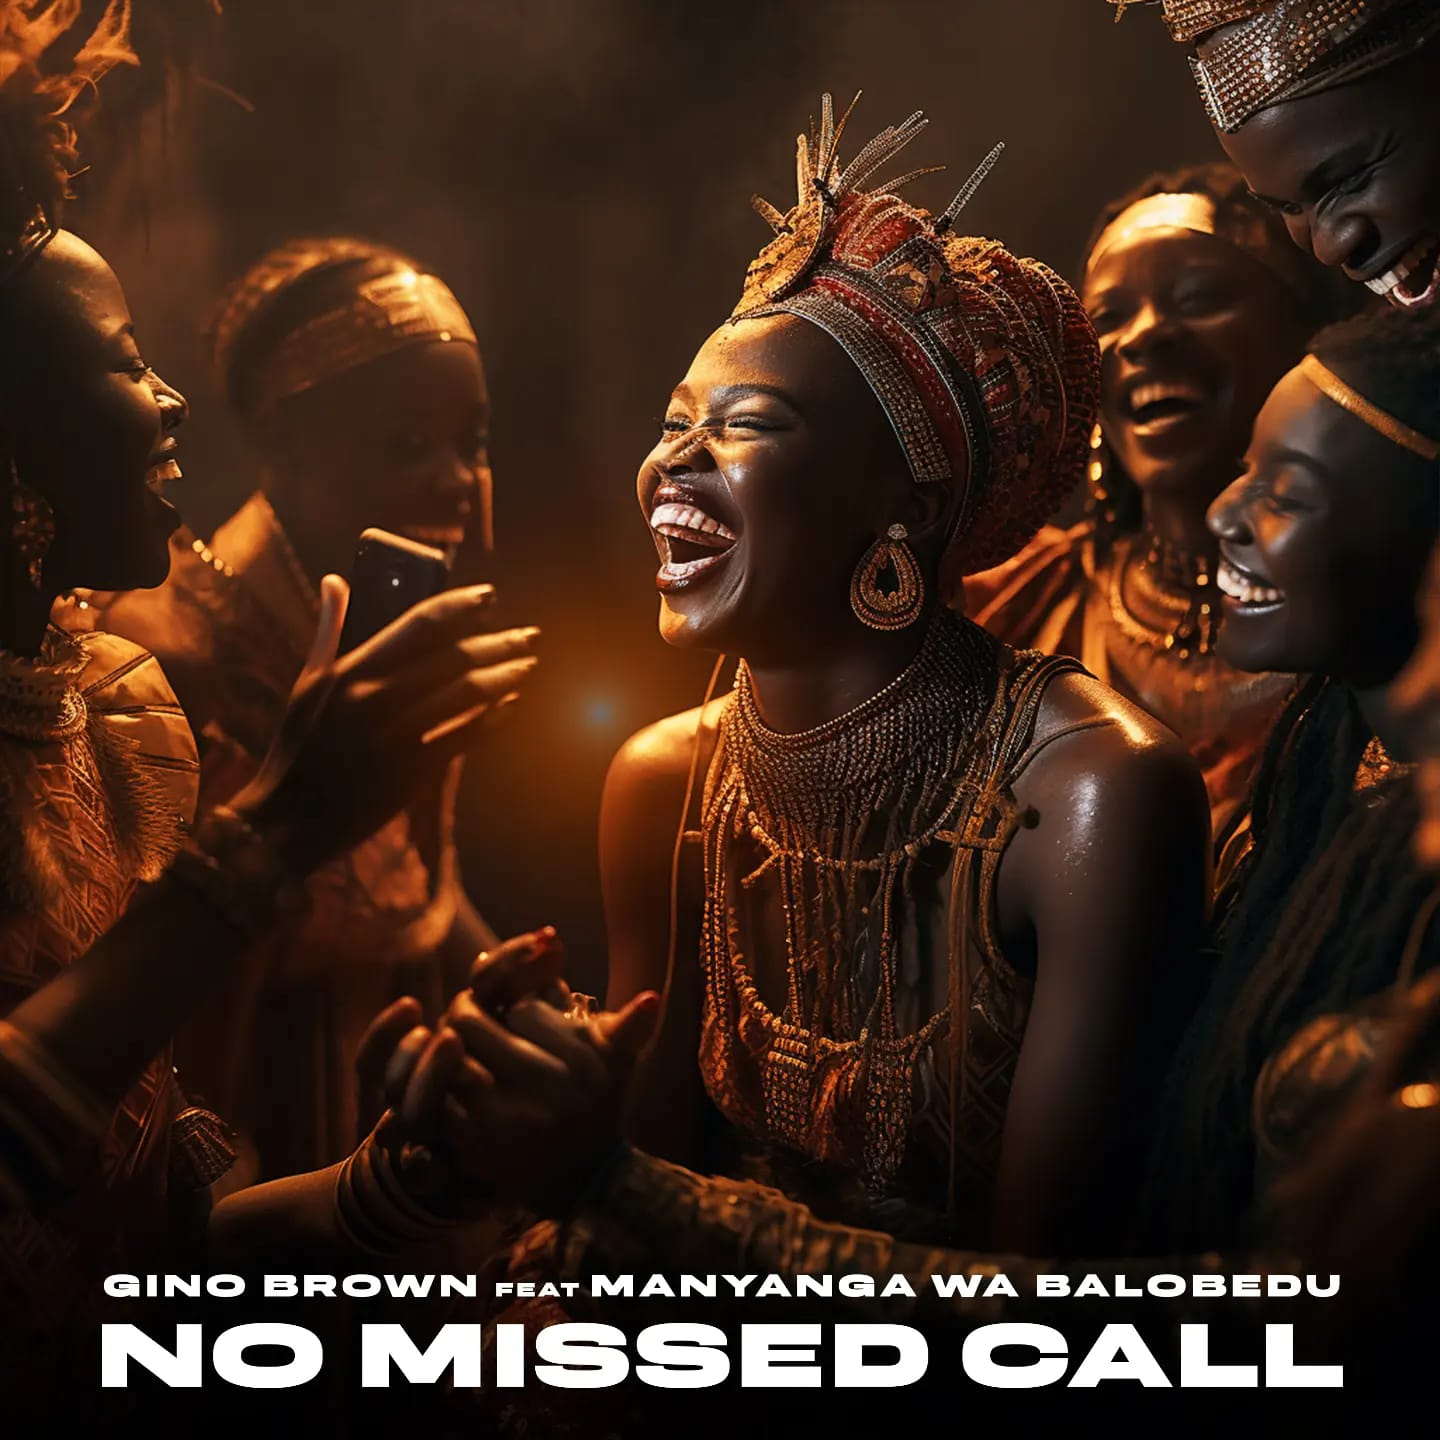 Gino Brown releases ‘No Missed Calls’ Featuring Manyanga